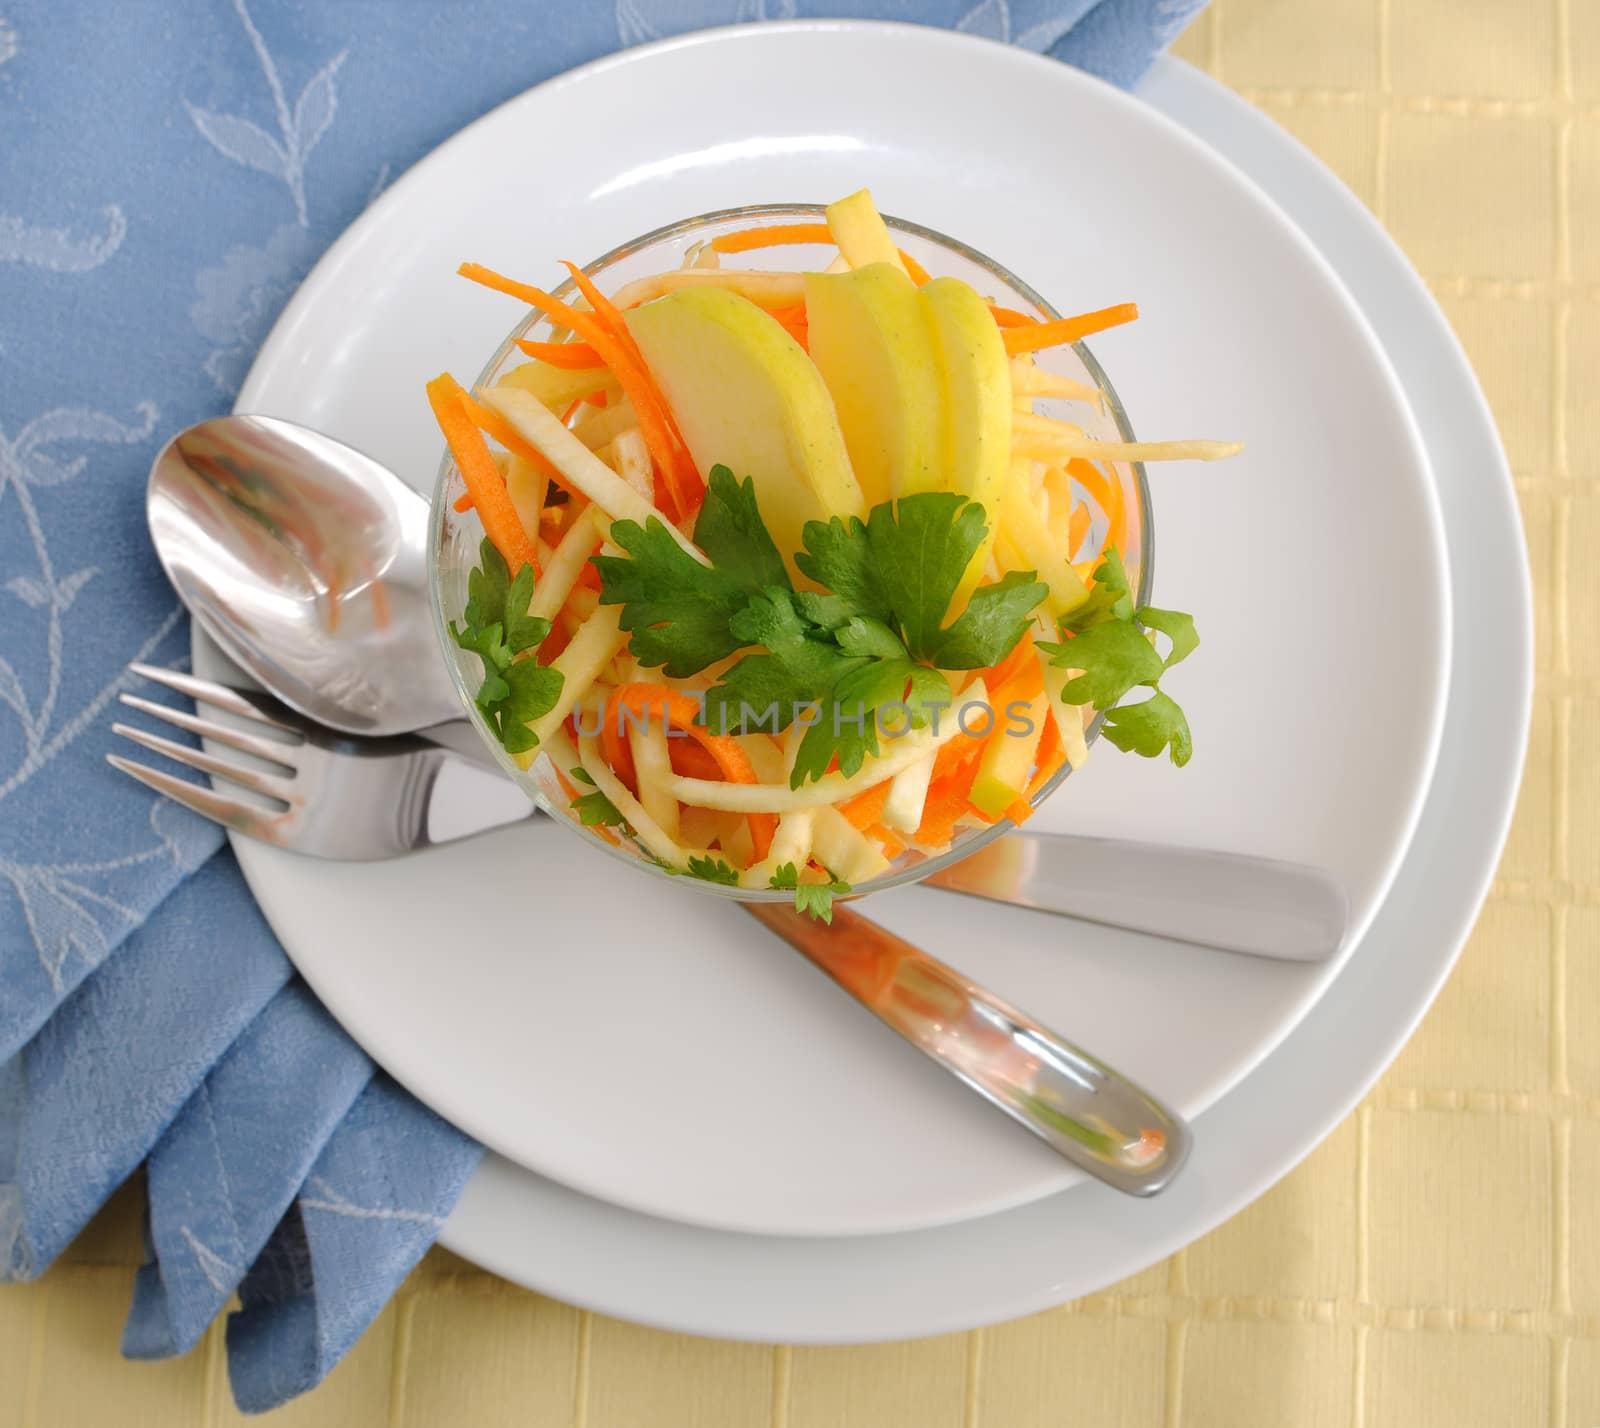 Salad of celery root and leaves with carrots, apples and shrimp